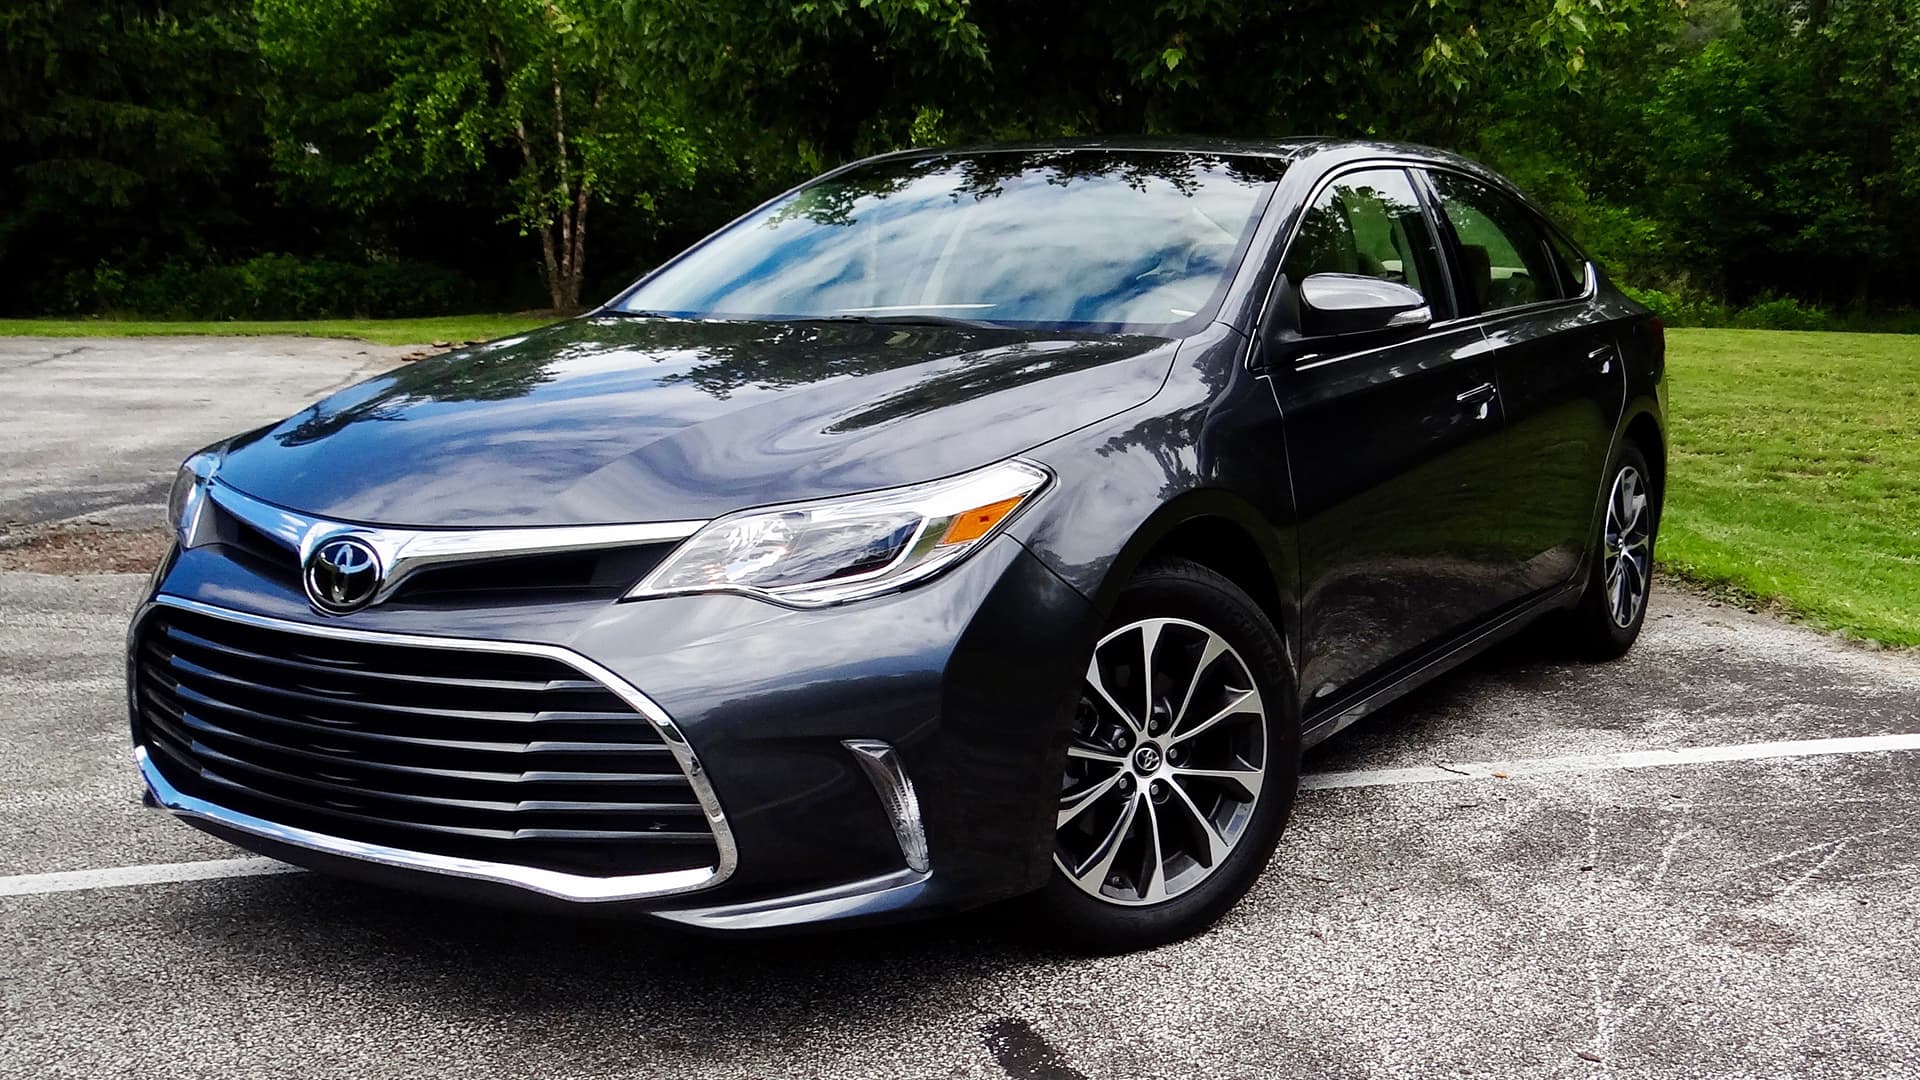 2017 Avalon Review: Toyota taught a new dog old tricks